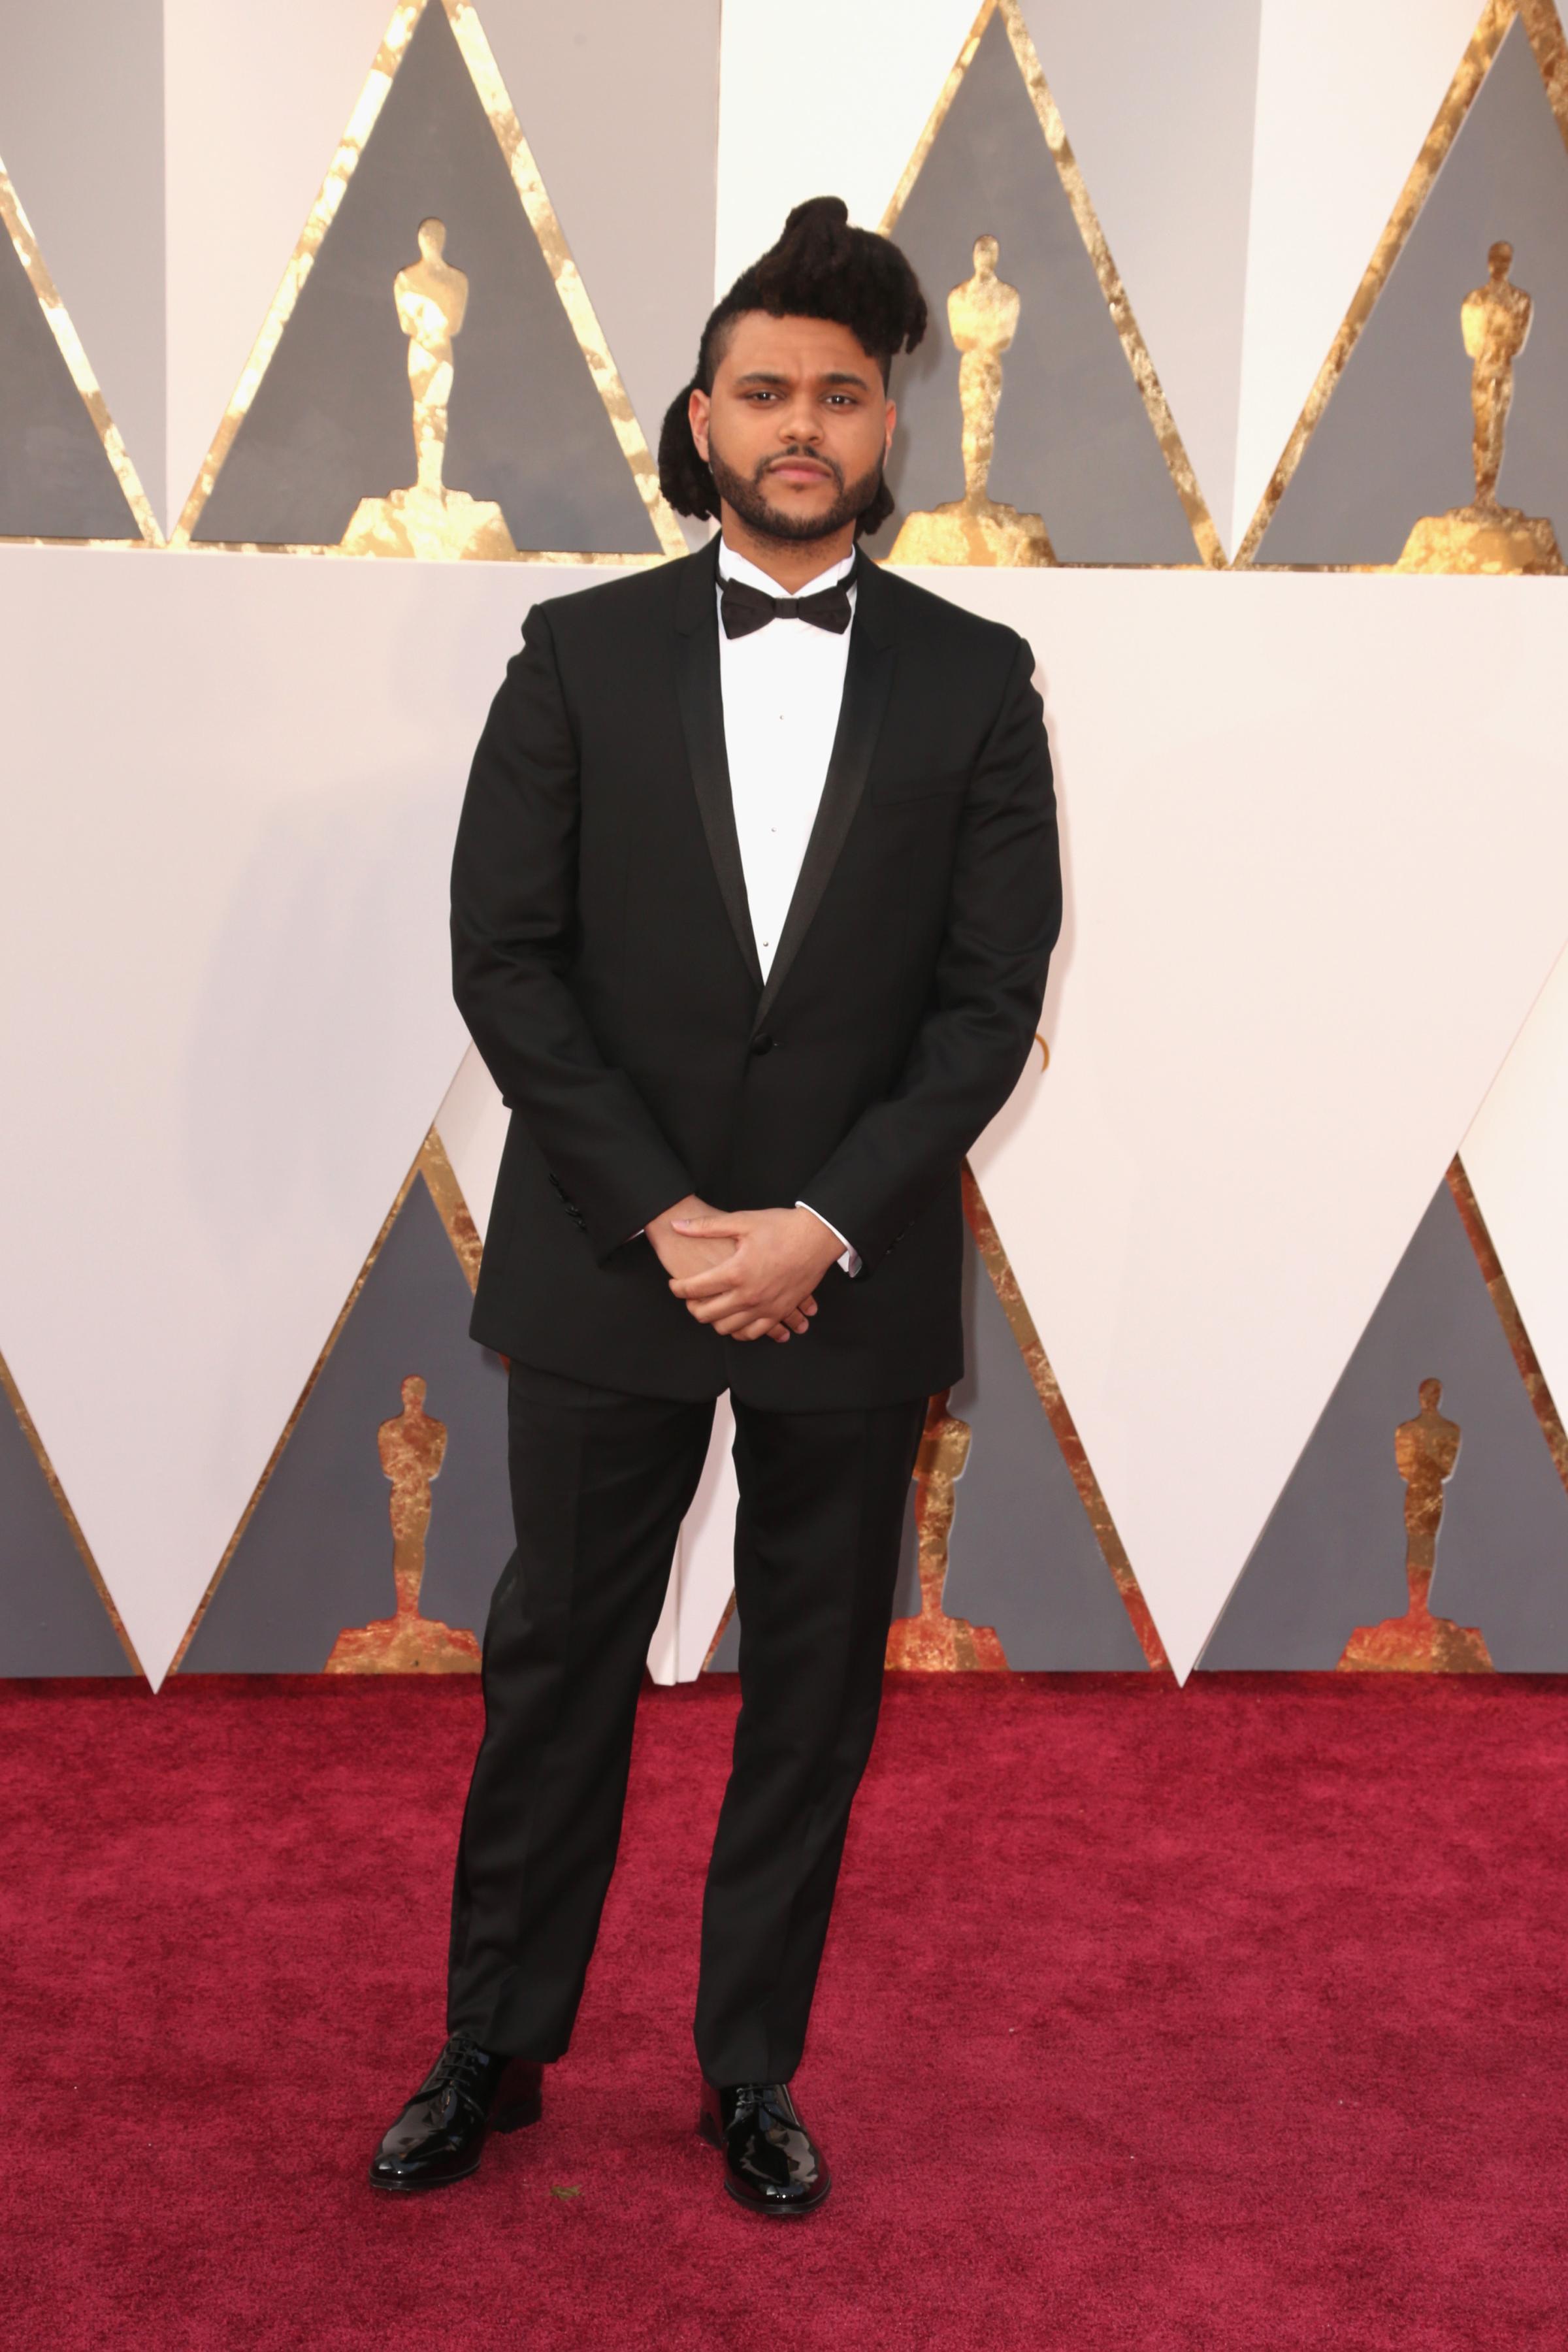 The Weeknd attends the 88th Annual Academy Awards on Feb. 28, 2016 in Hollywood, Calif.